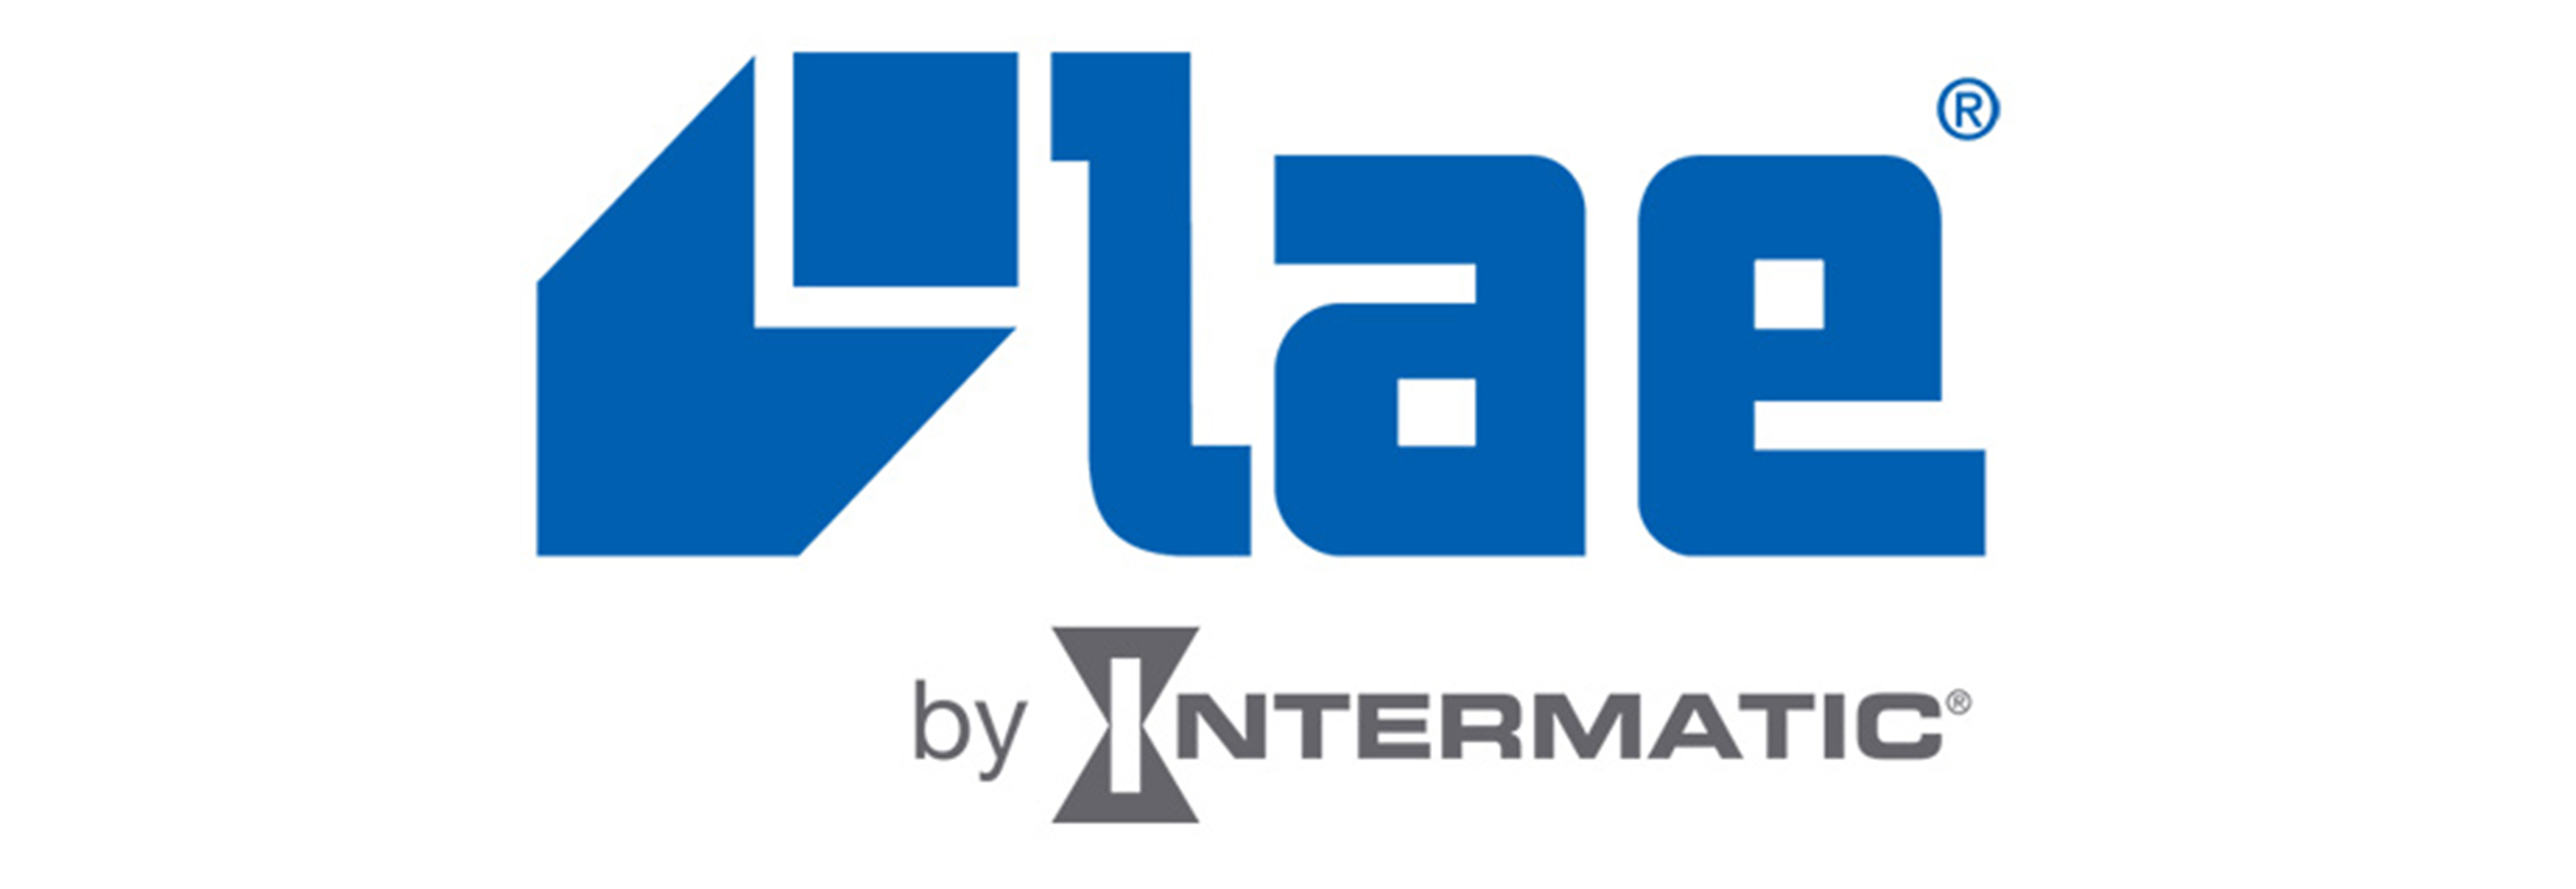 Intermatic Partners with LAE Electronic, Expands HVAC/R Offerings